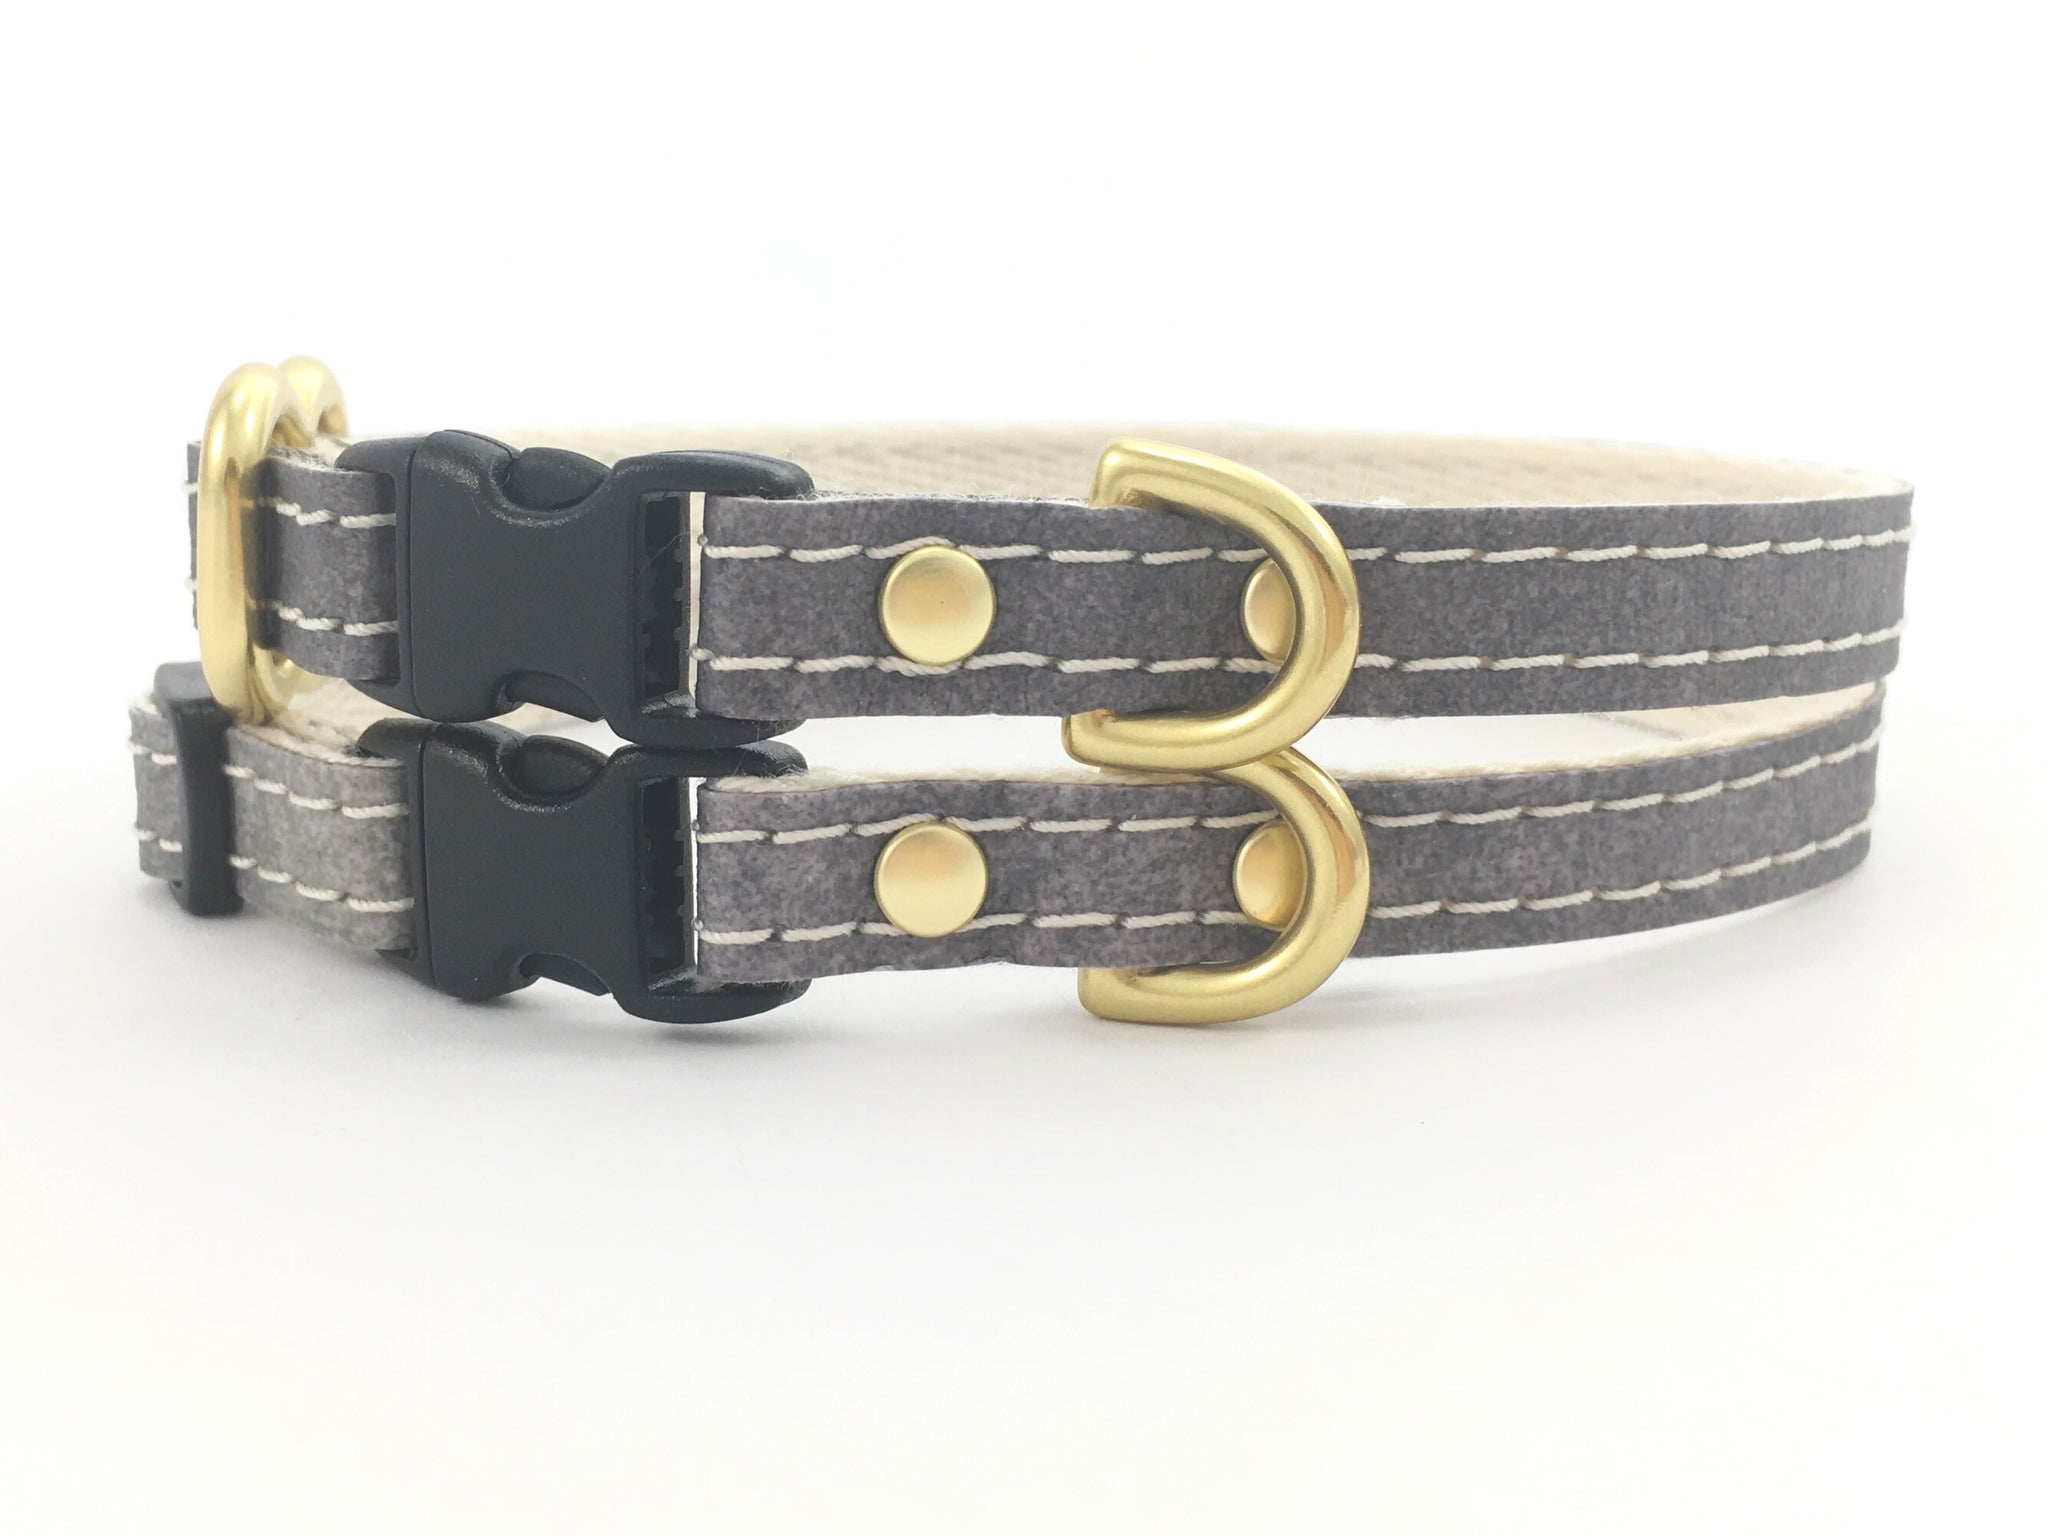 Grey Vegan Leather Miniature Dog Collar With Solid Brass Hardware